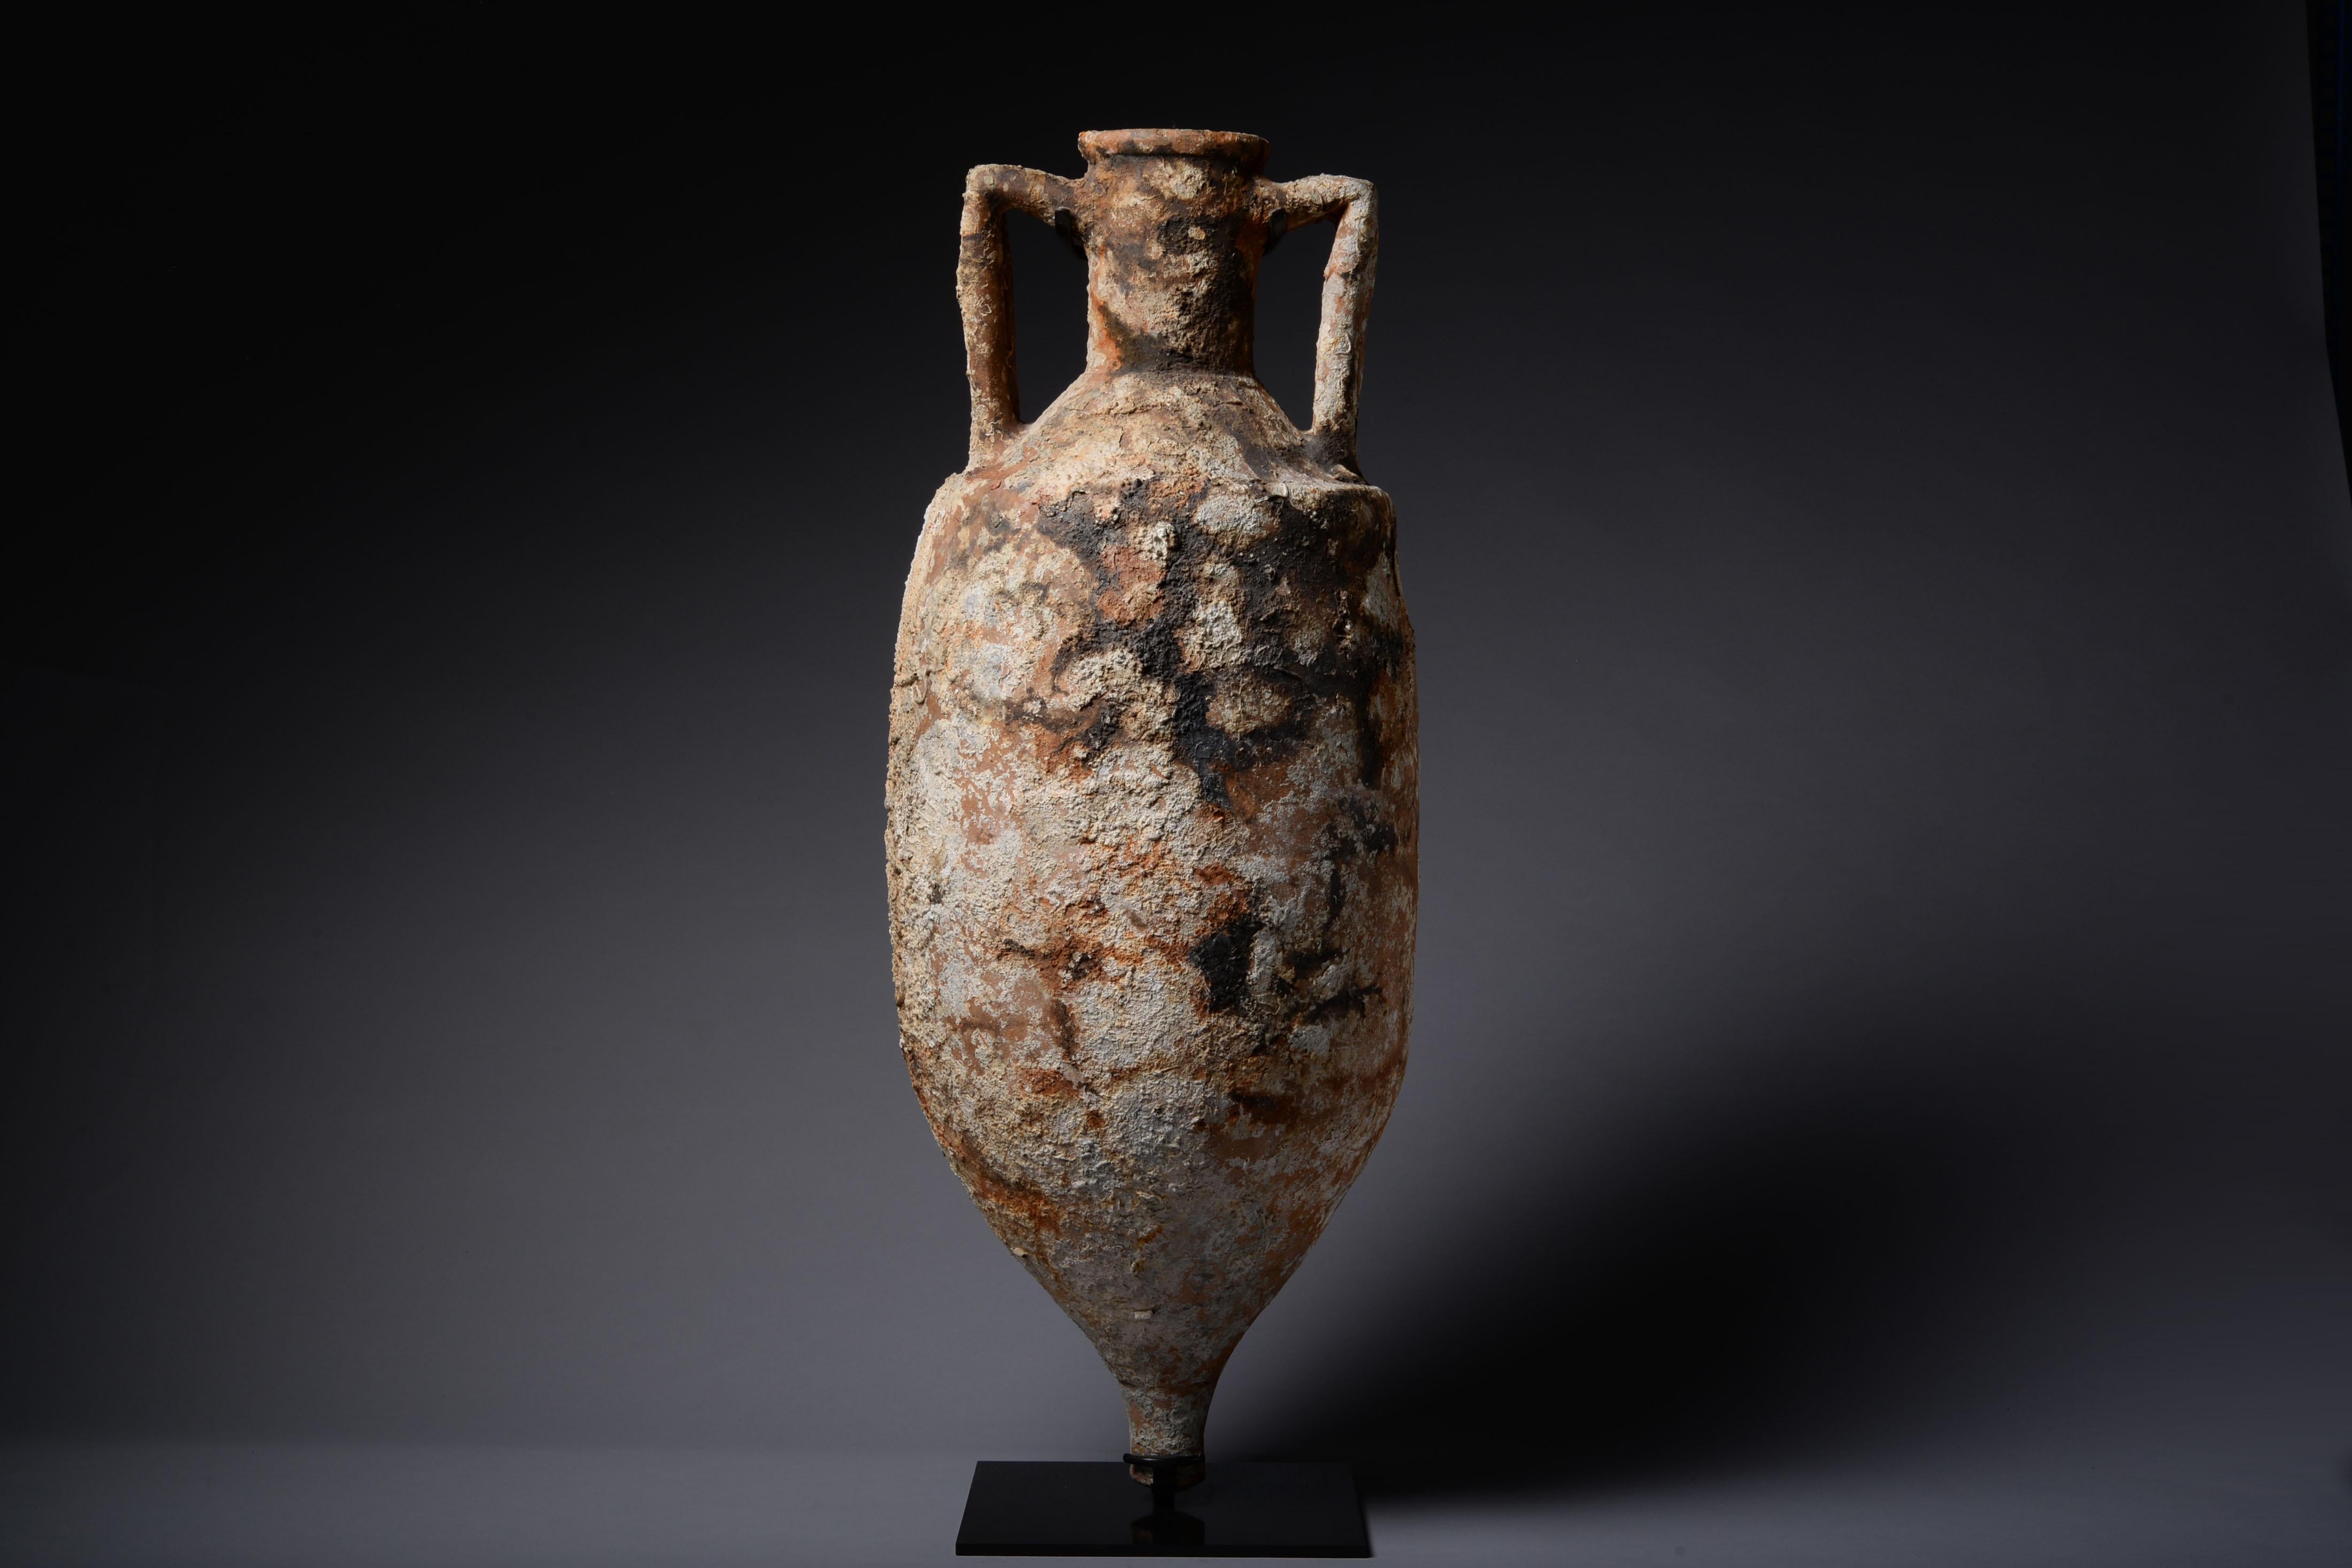 A large and beautifully encrusted ancient Roman Amphora, sea salvaged and dating to the 1st-2nd century AD.

Salvaged from the depths of the Mediterranean, this large vessel was lost in some ancient shipwreck. Once filled with the produce of the